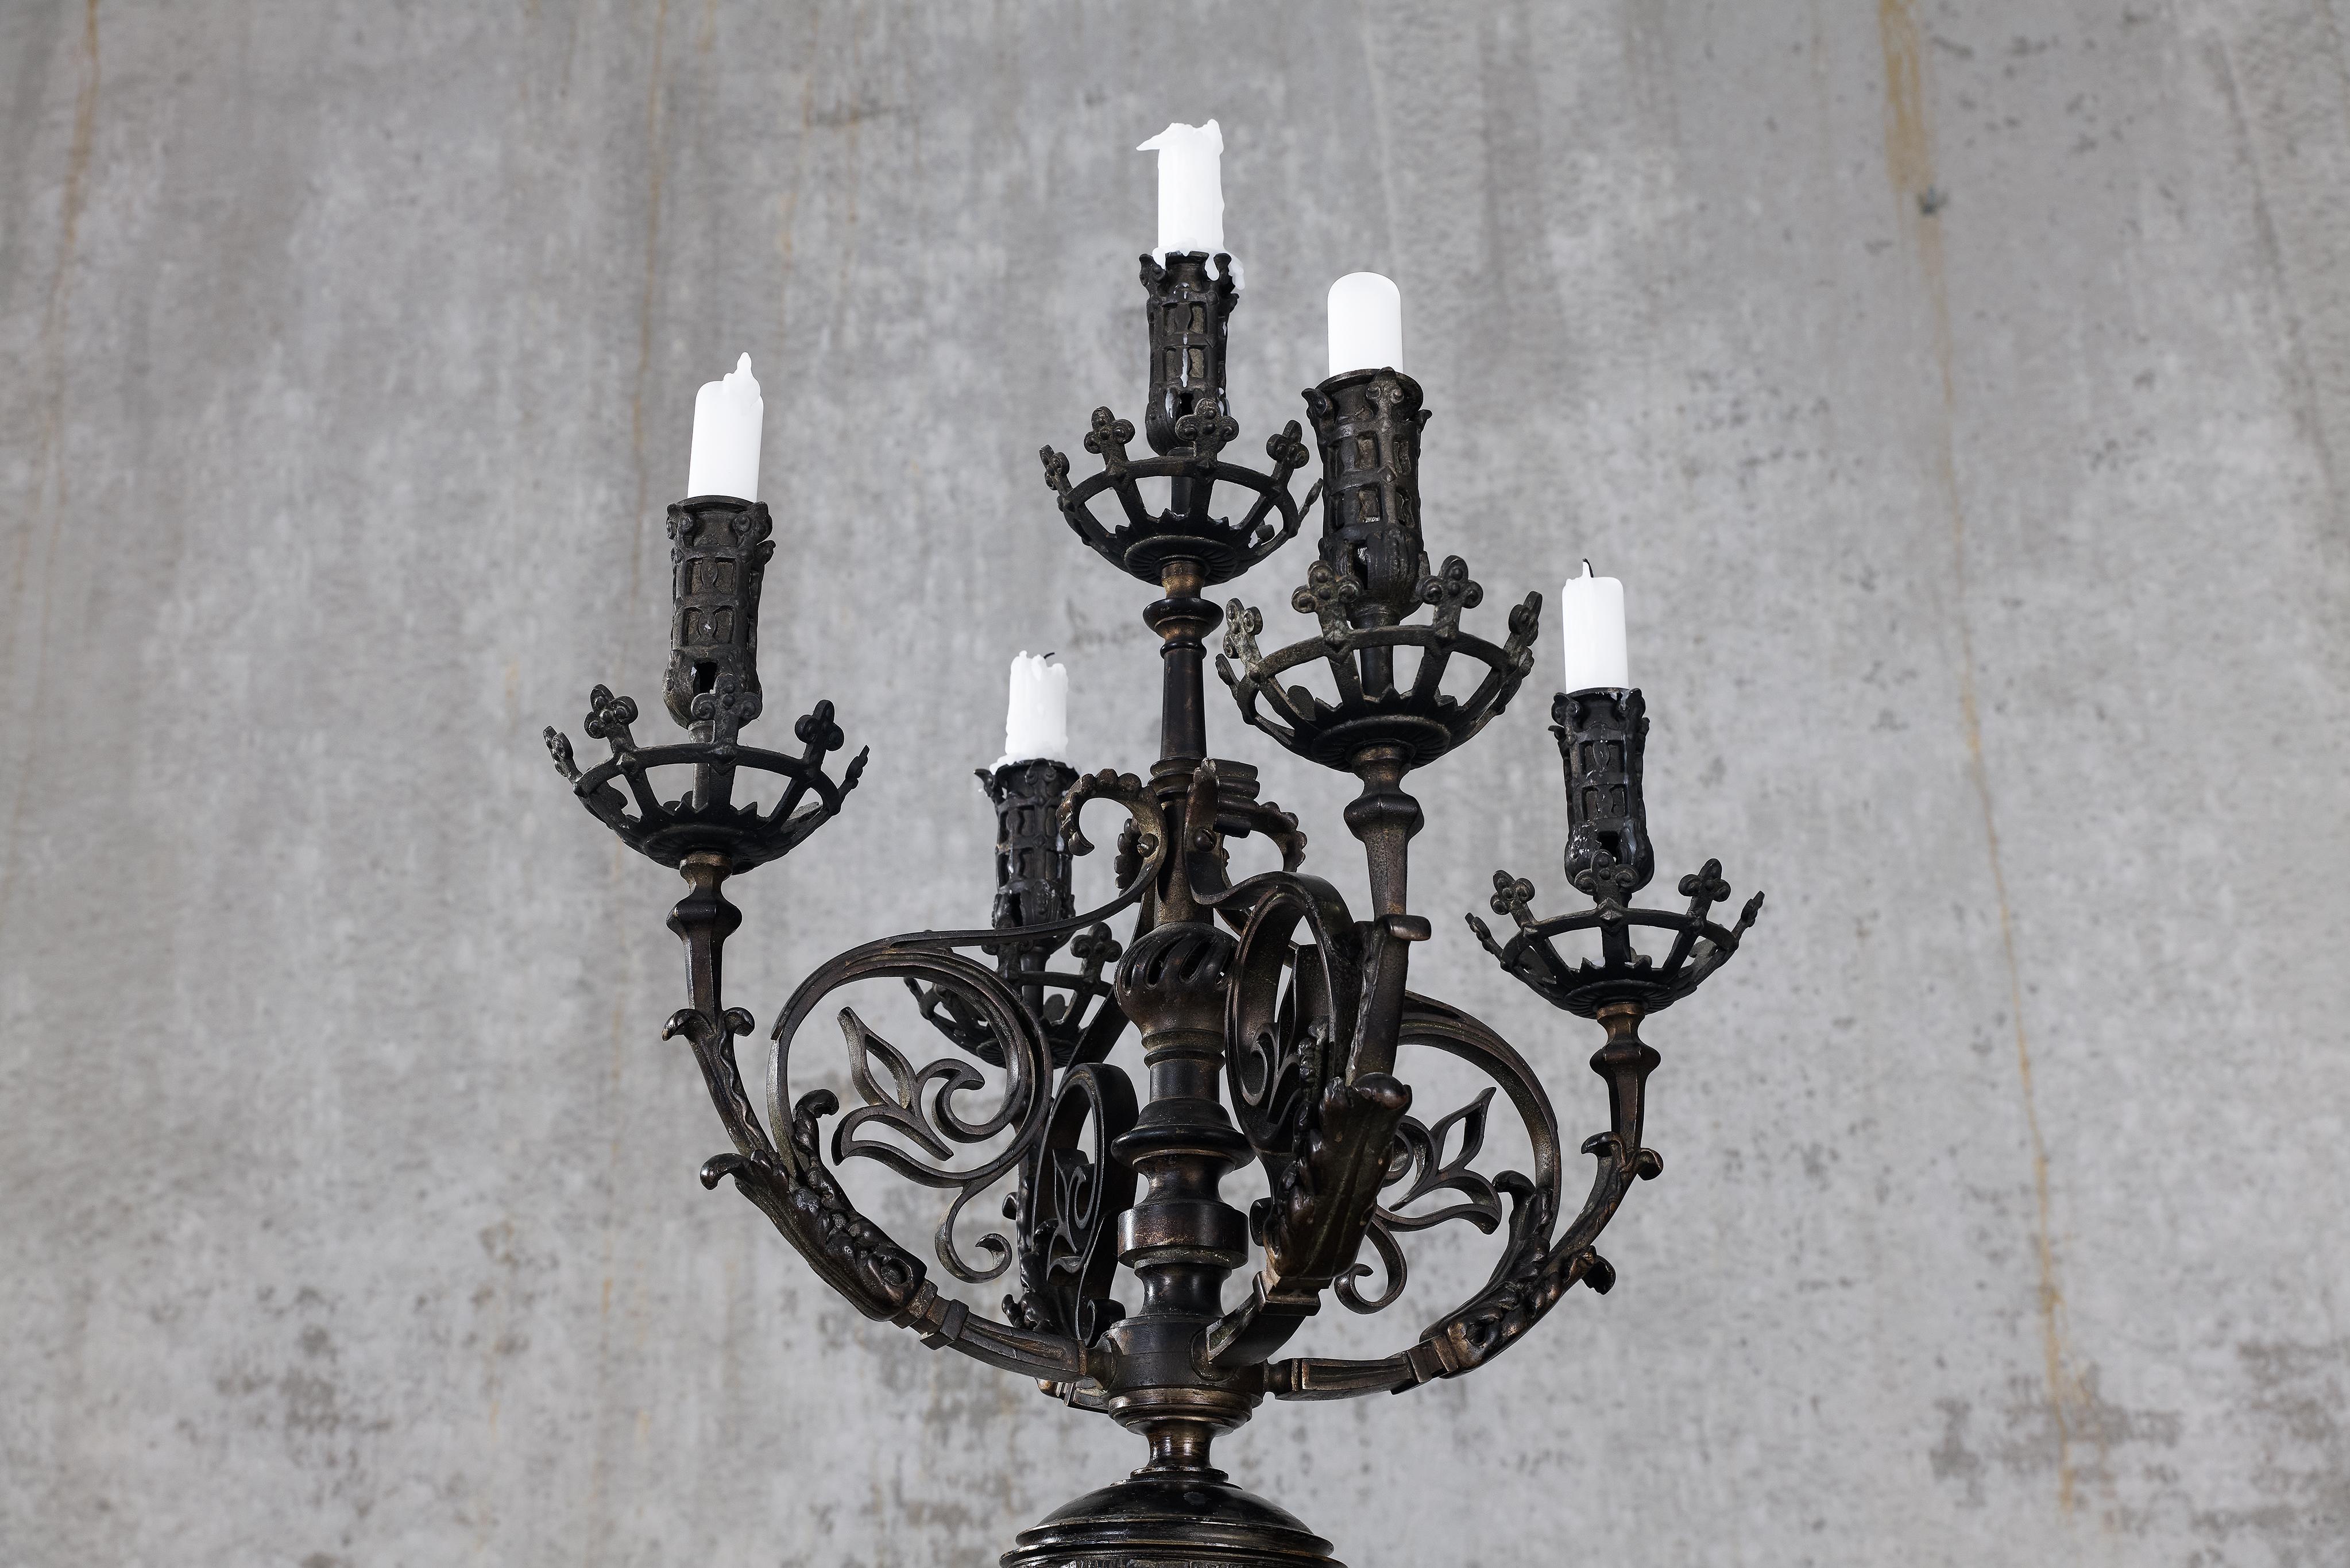 This impressive pair of five-light candelabra stems from the late nineteenth century. The ornate design, possibly French, exhibits a great deal of detailed craftsmanship. The five arms are adorned with foliage, displaying both ornamental acanthus